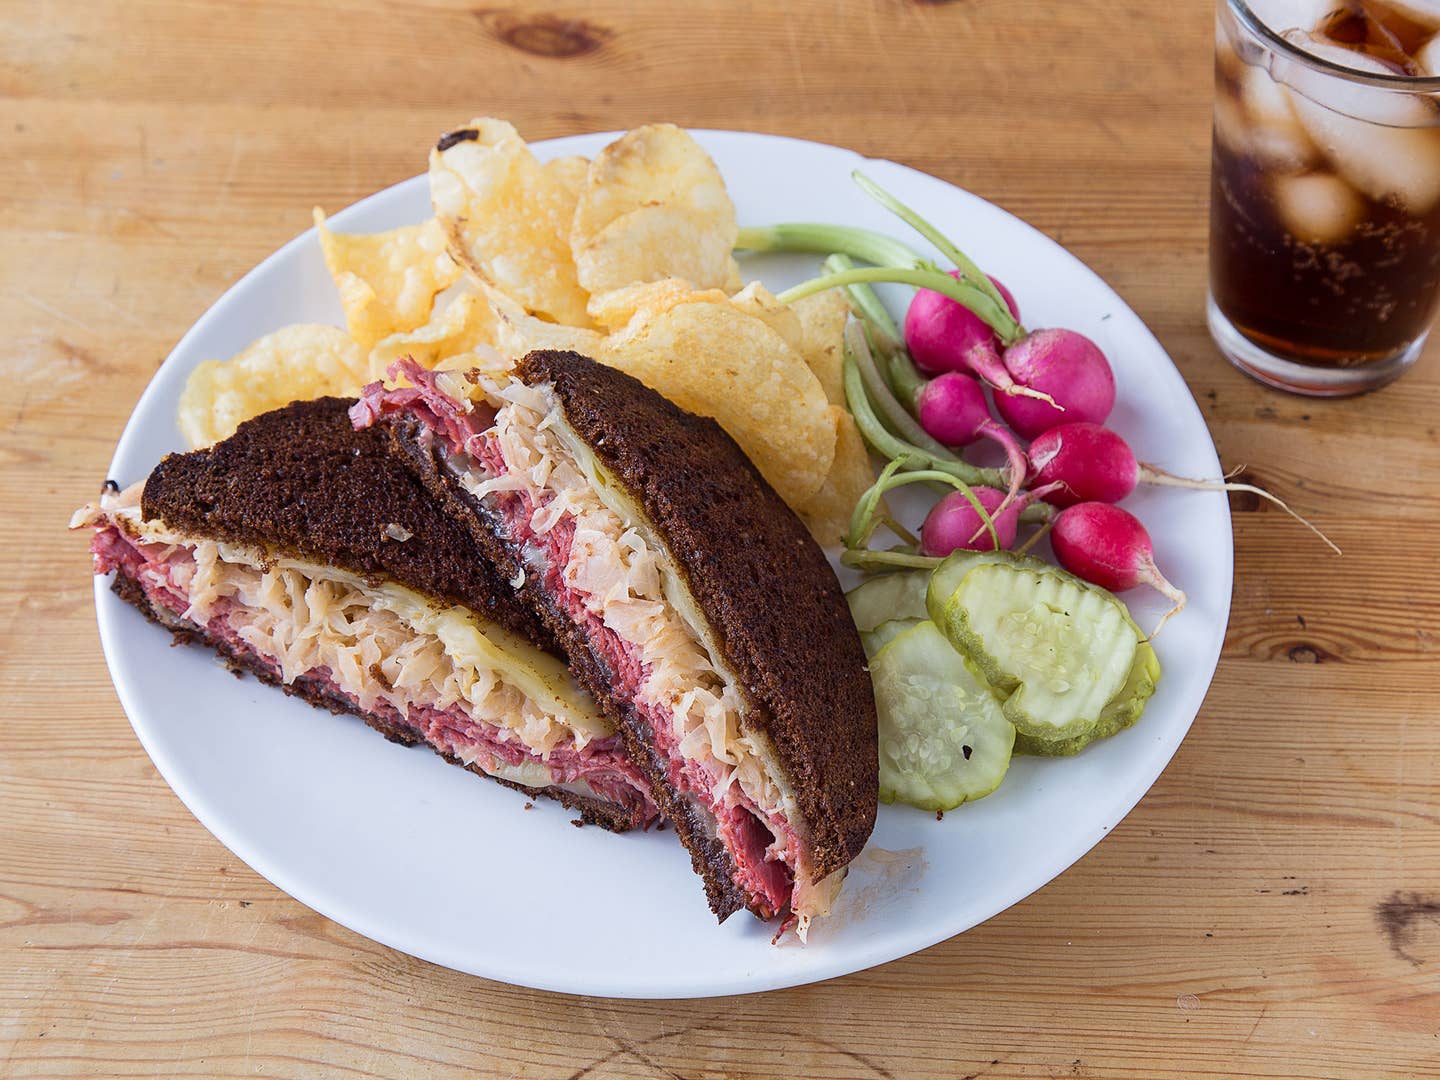 Who Really Invented the Reuben?